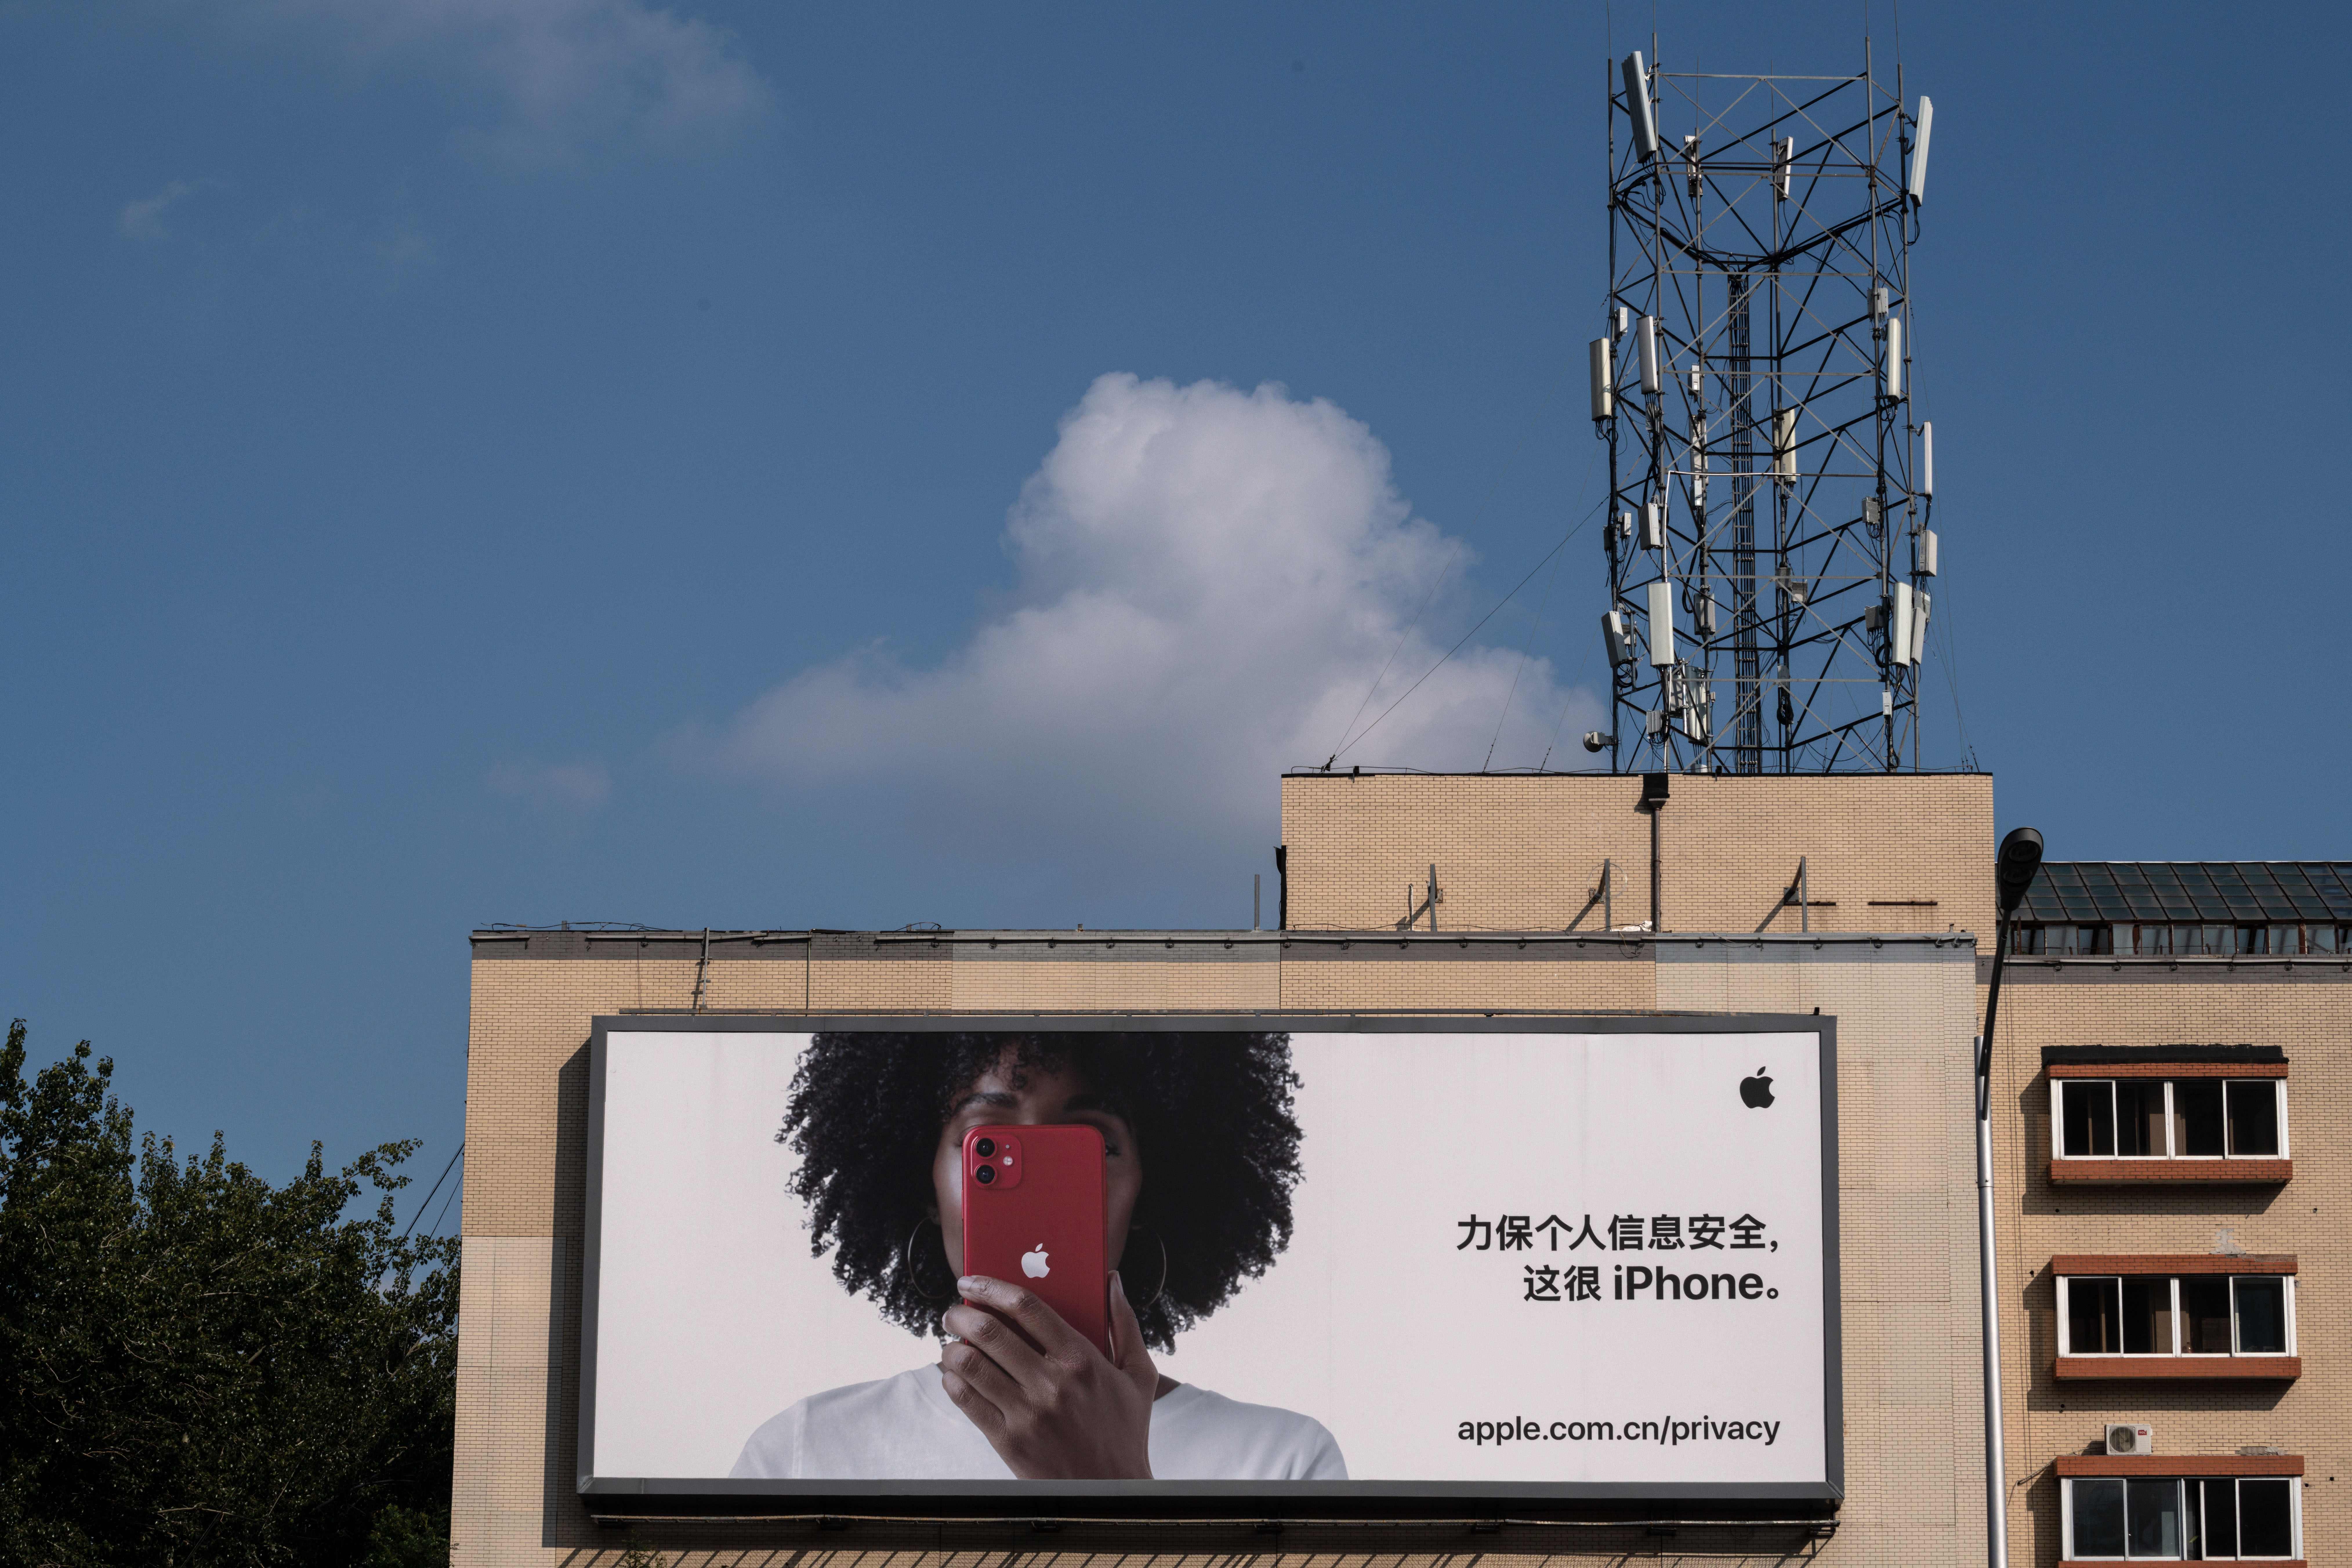 <p>A cellphone tower on top of a building is seen next to a commercial billboard for the iPhone in Beijing</p>